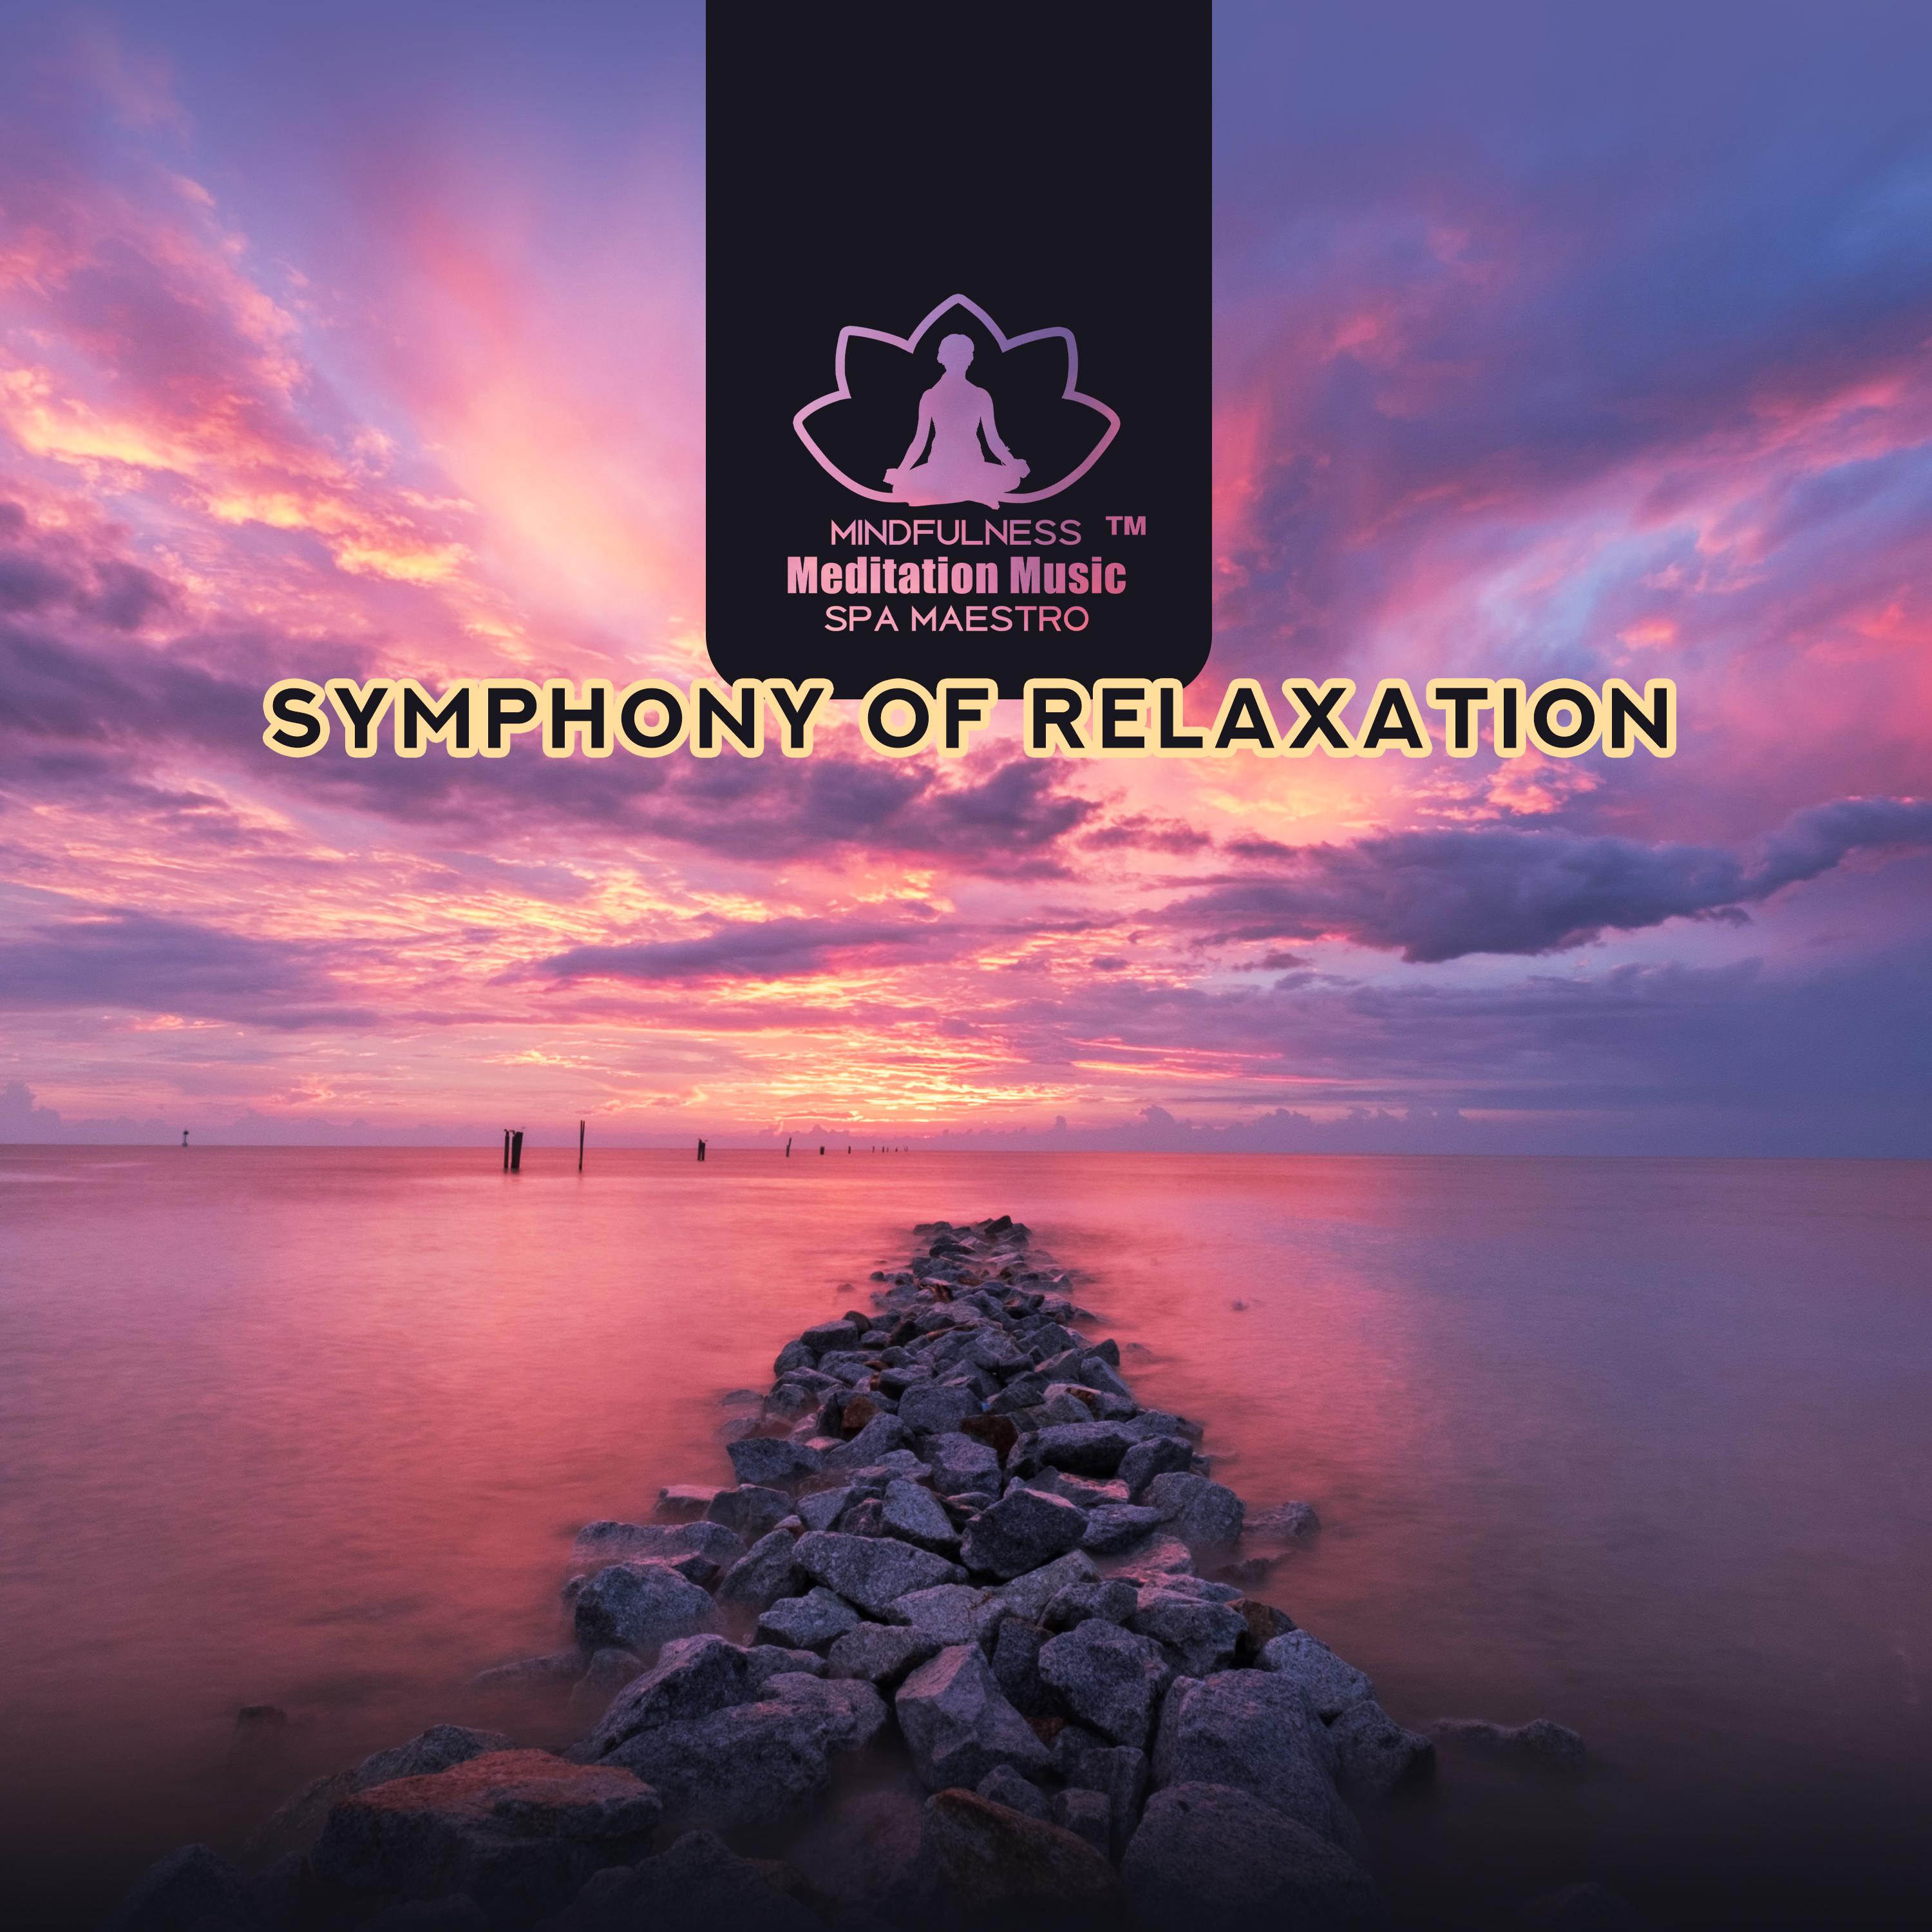 Symphony of Relaxation